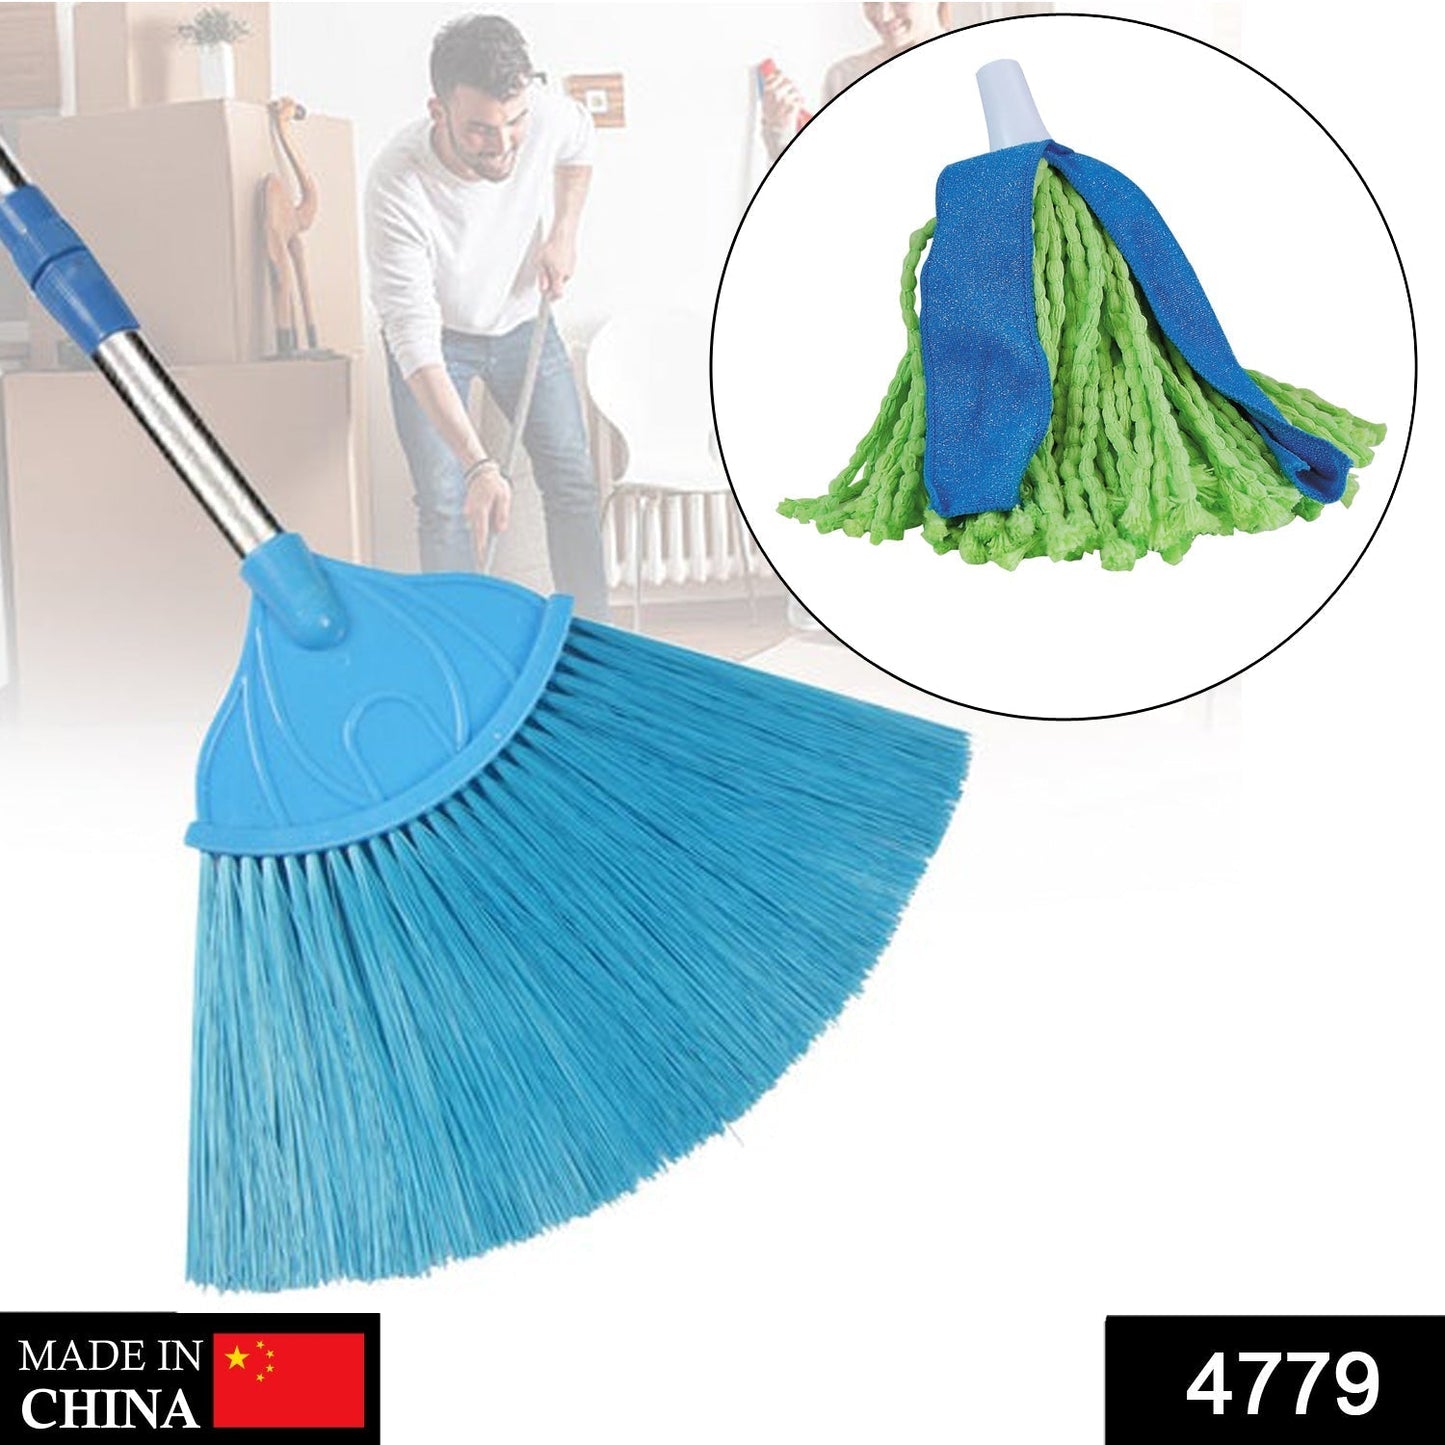 4779 Ceiling Broom Fan for cleaning and wiping over dusty floor surfaces with effective performance. DeoDap